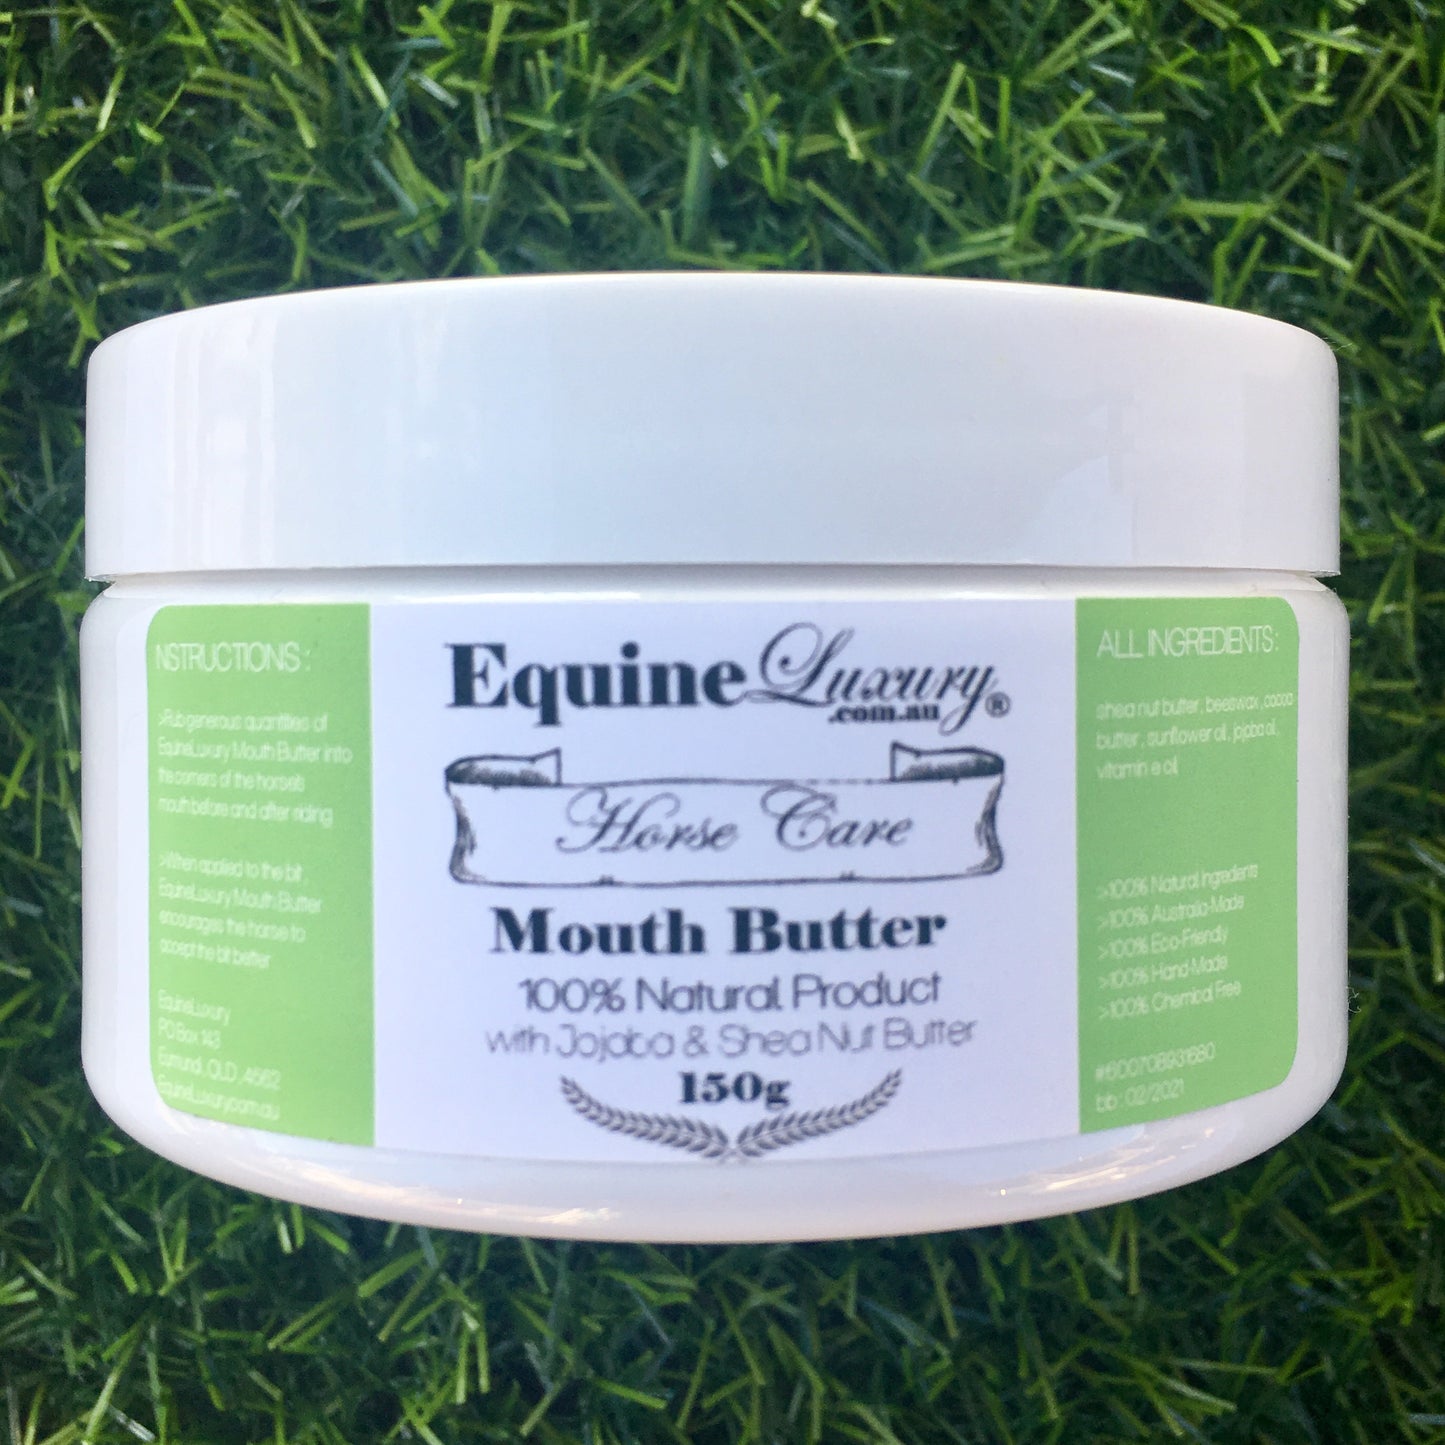 EquineLuxury Mouth Butter with Jojoba & Shea Nut Butter